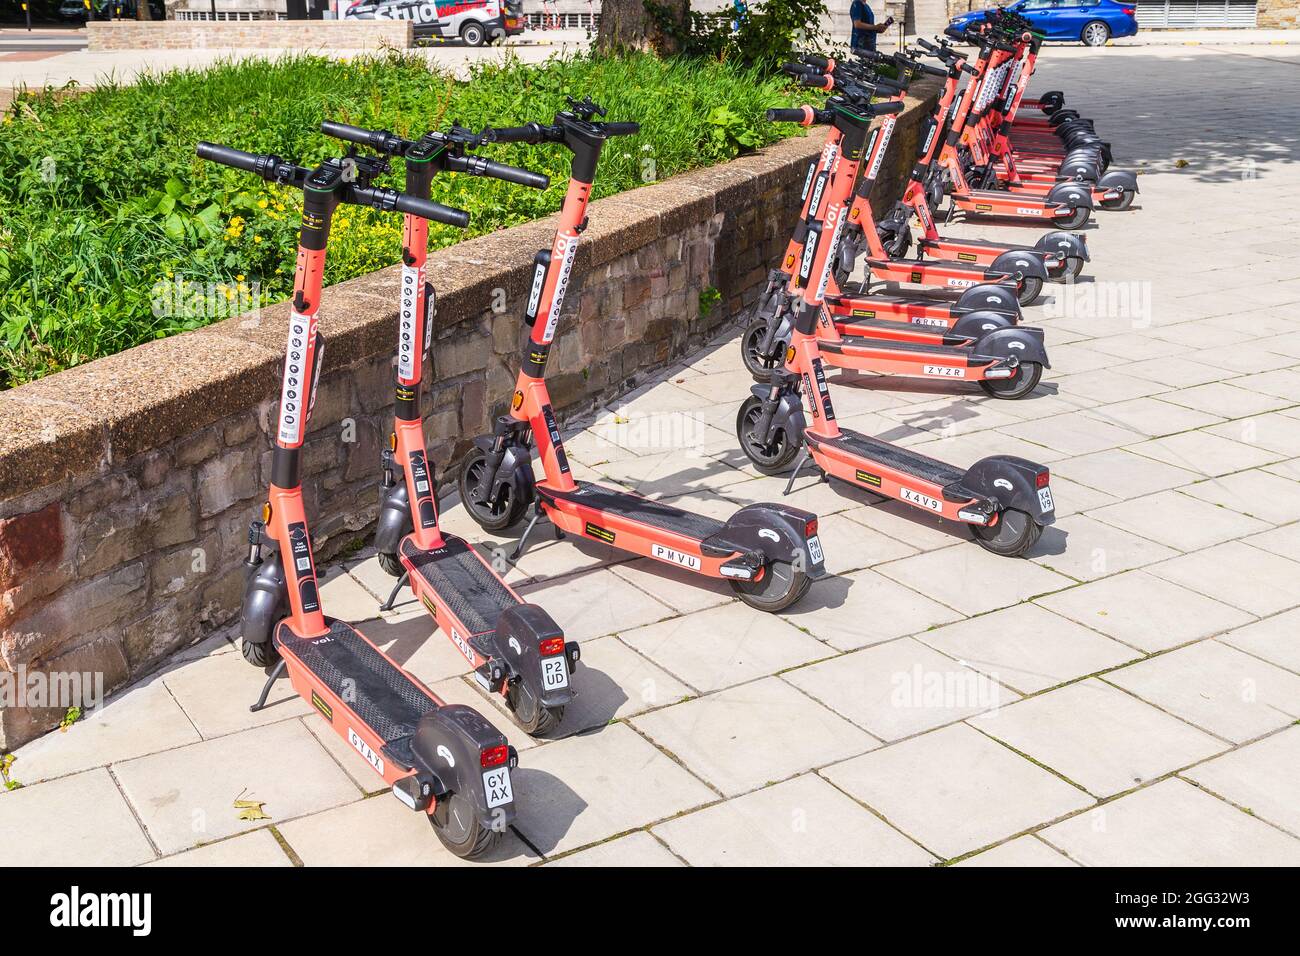 BRISTOL, UK - 19TH AUG 2021: Voi. electric scooters on a street in Bristol during the day. A person can be seen in the background. Stock Photo